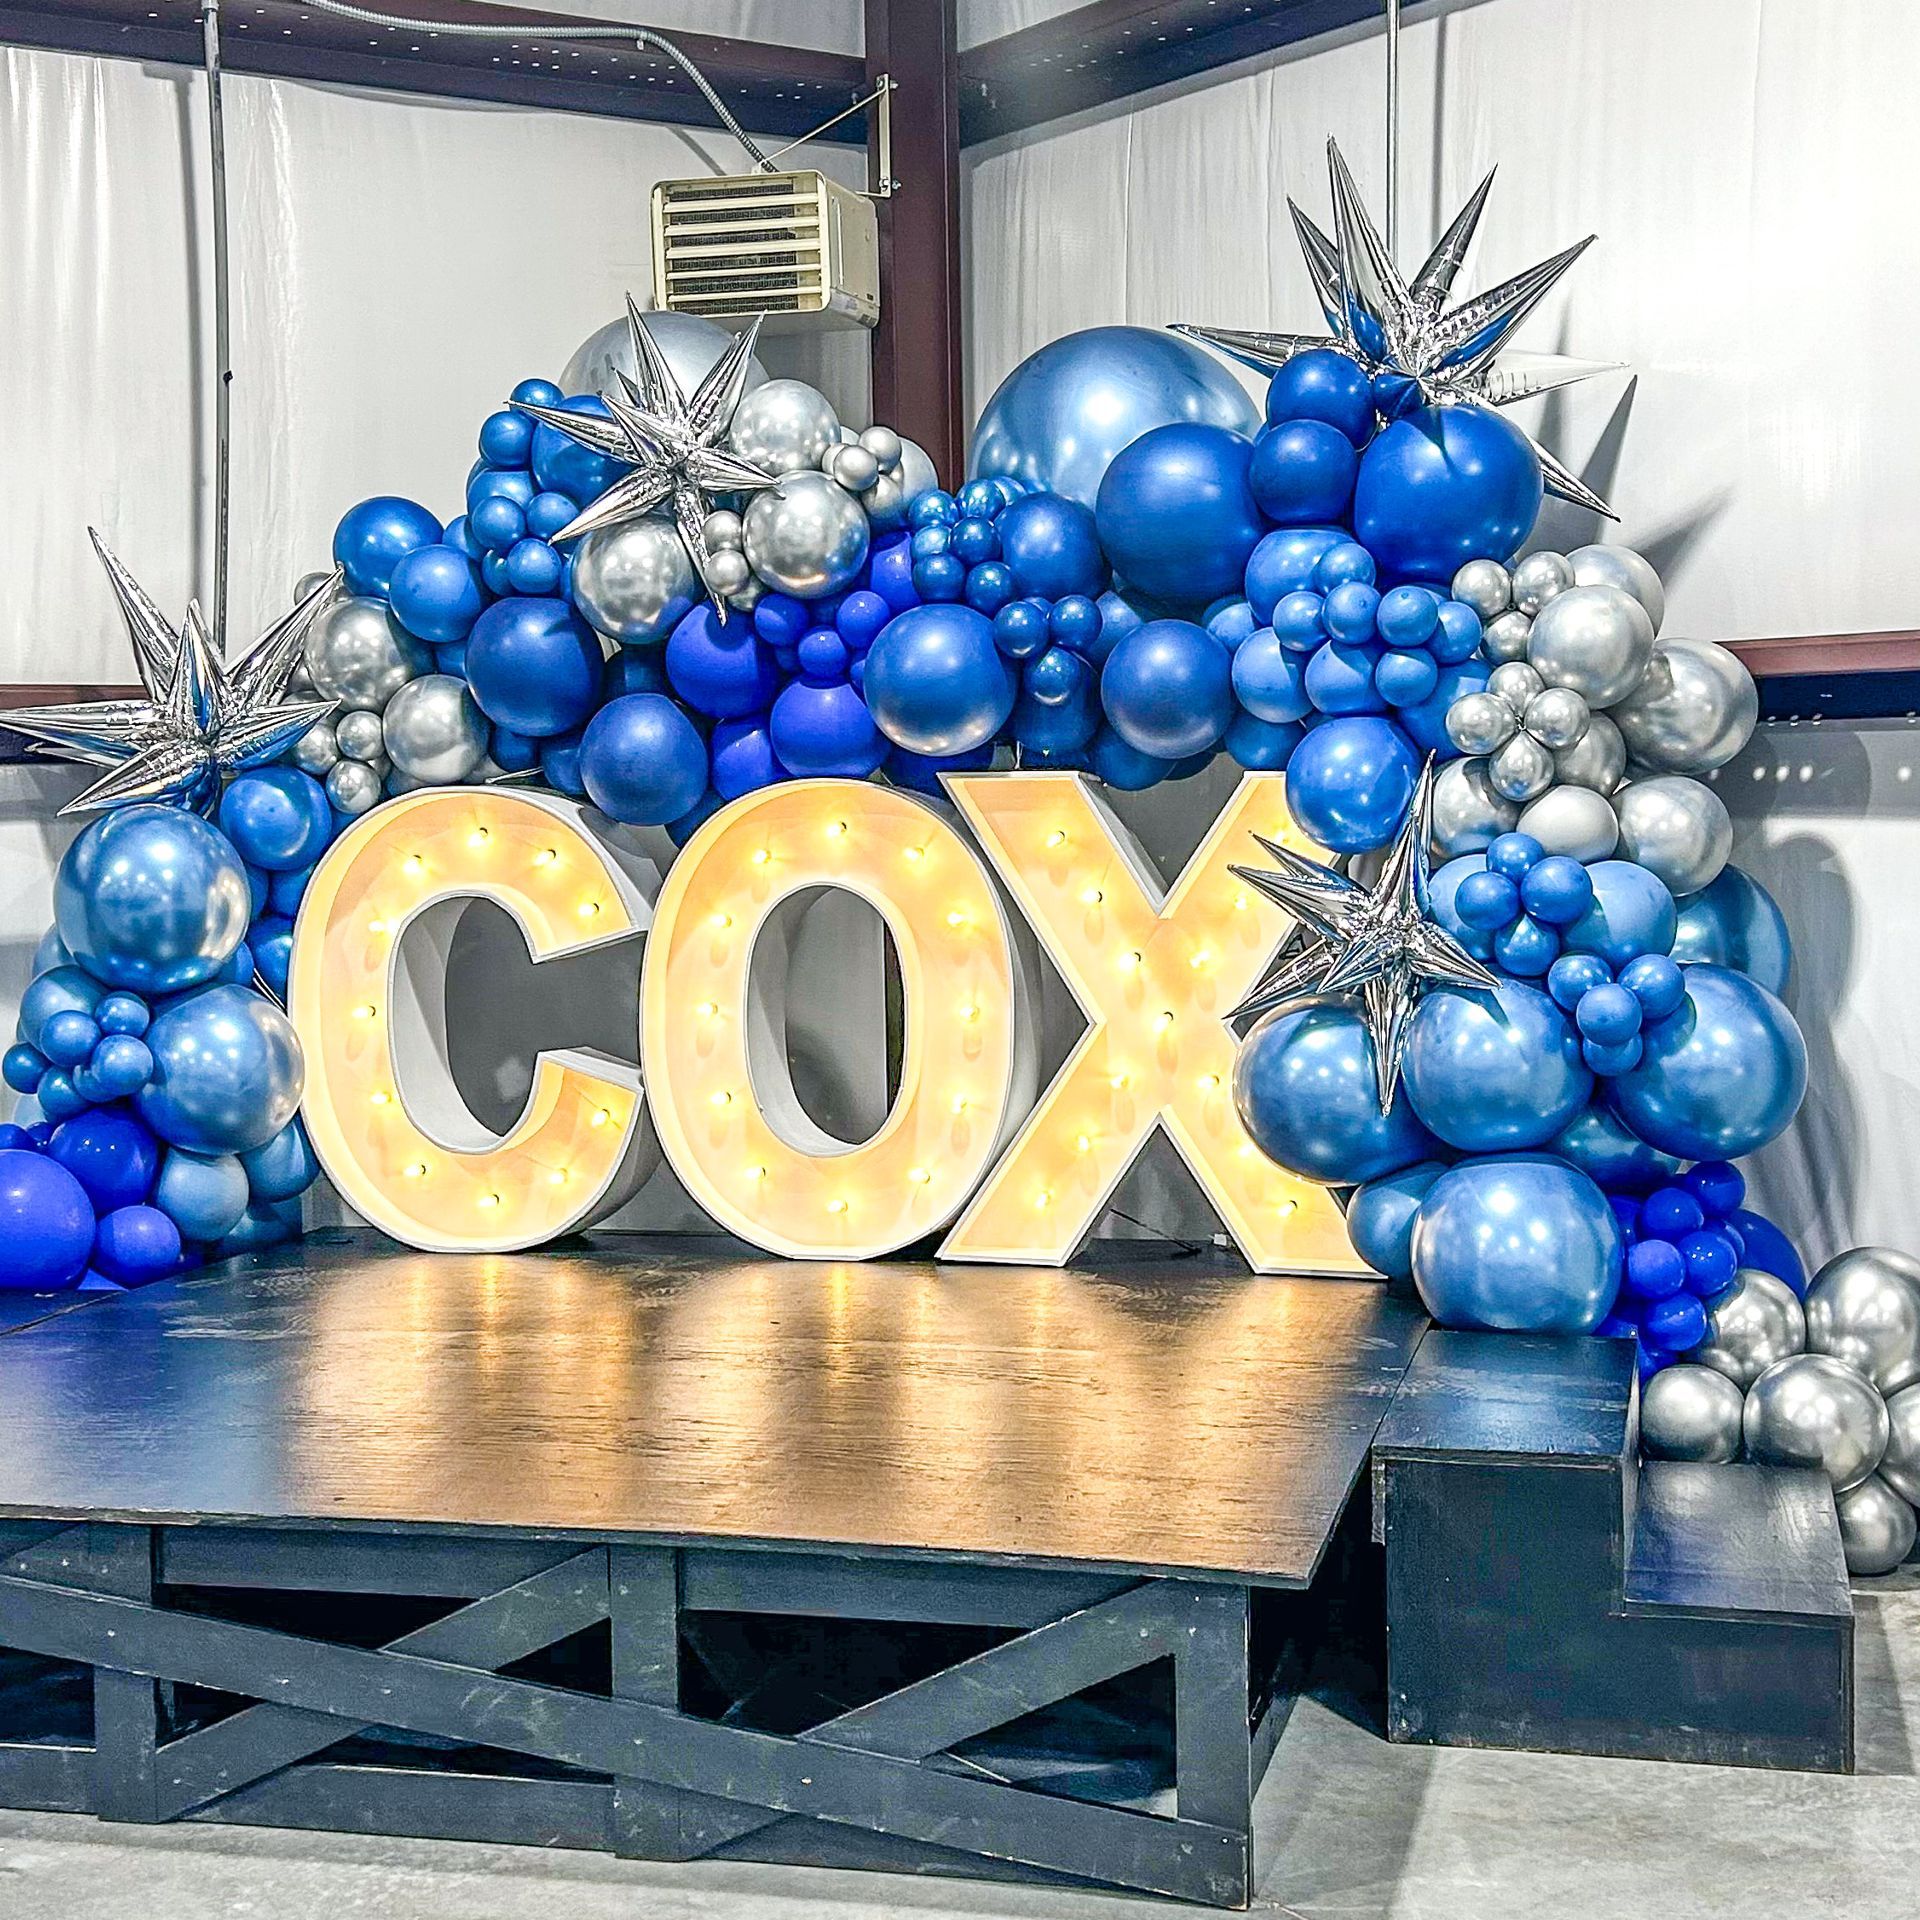 A stage decorated with blue and silver balloons and a lighted sign that says cox